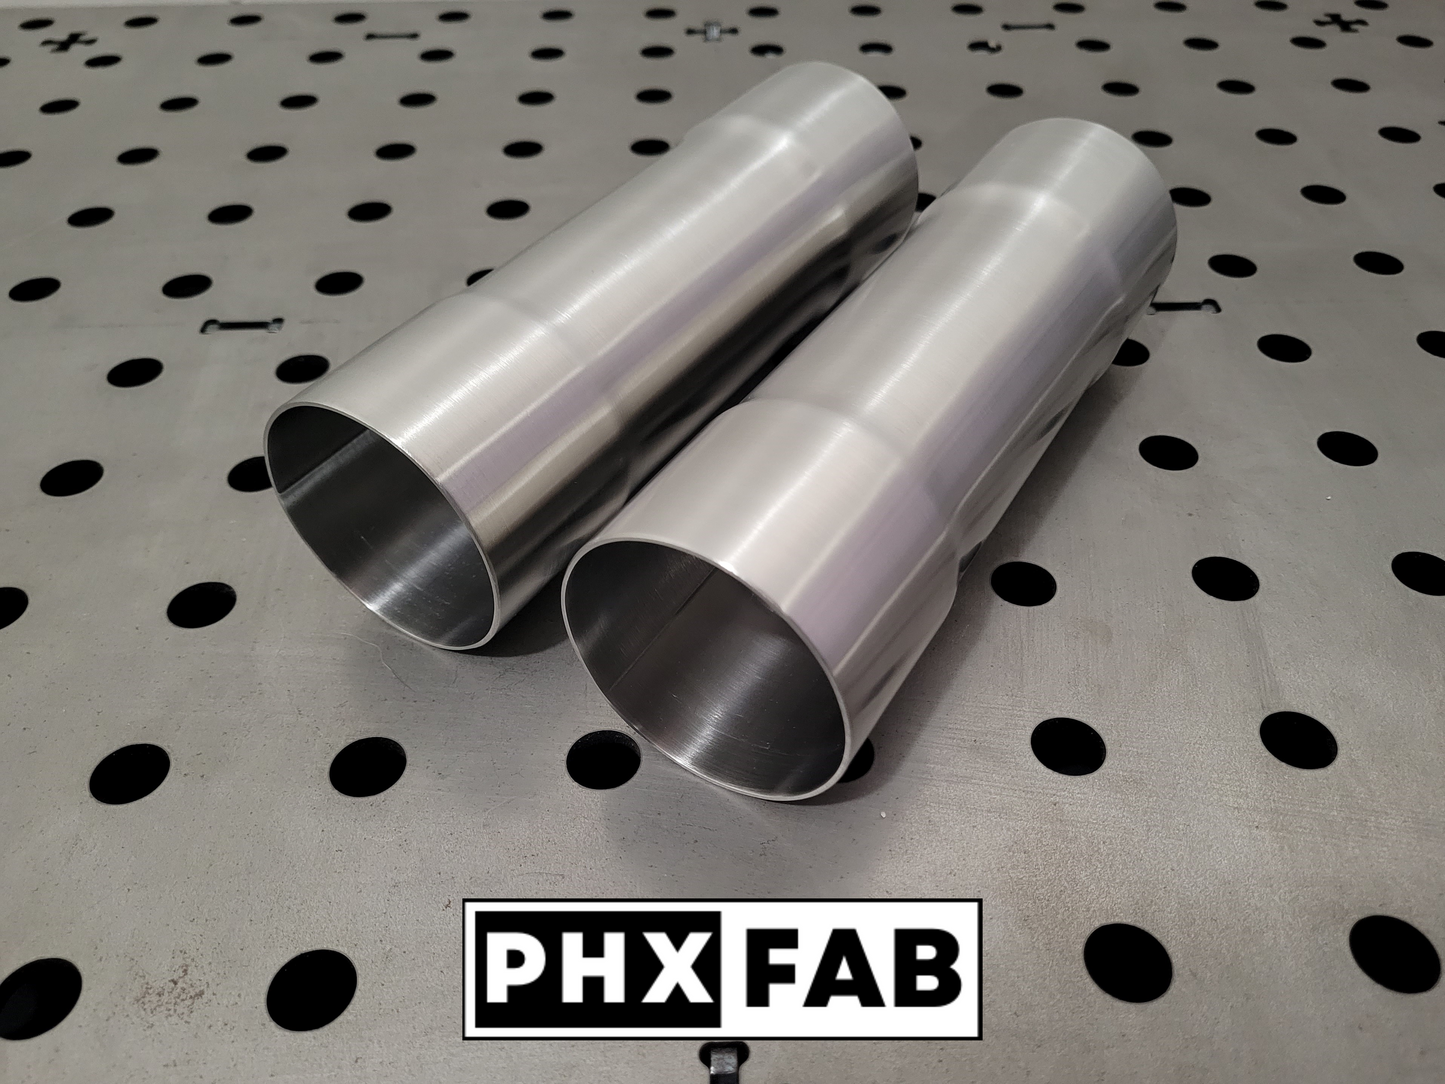 (2) 1 1/2" ID to 1 1/2" ID X 8" Length Stainless Coupler Exhaust Pipe Connector Adapter 304 Stainless Steel